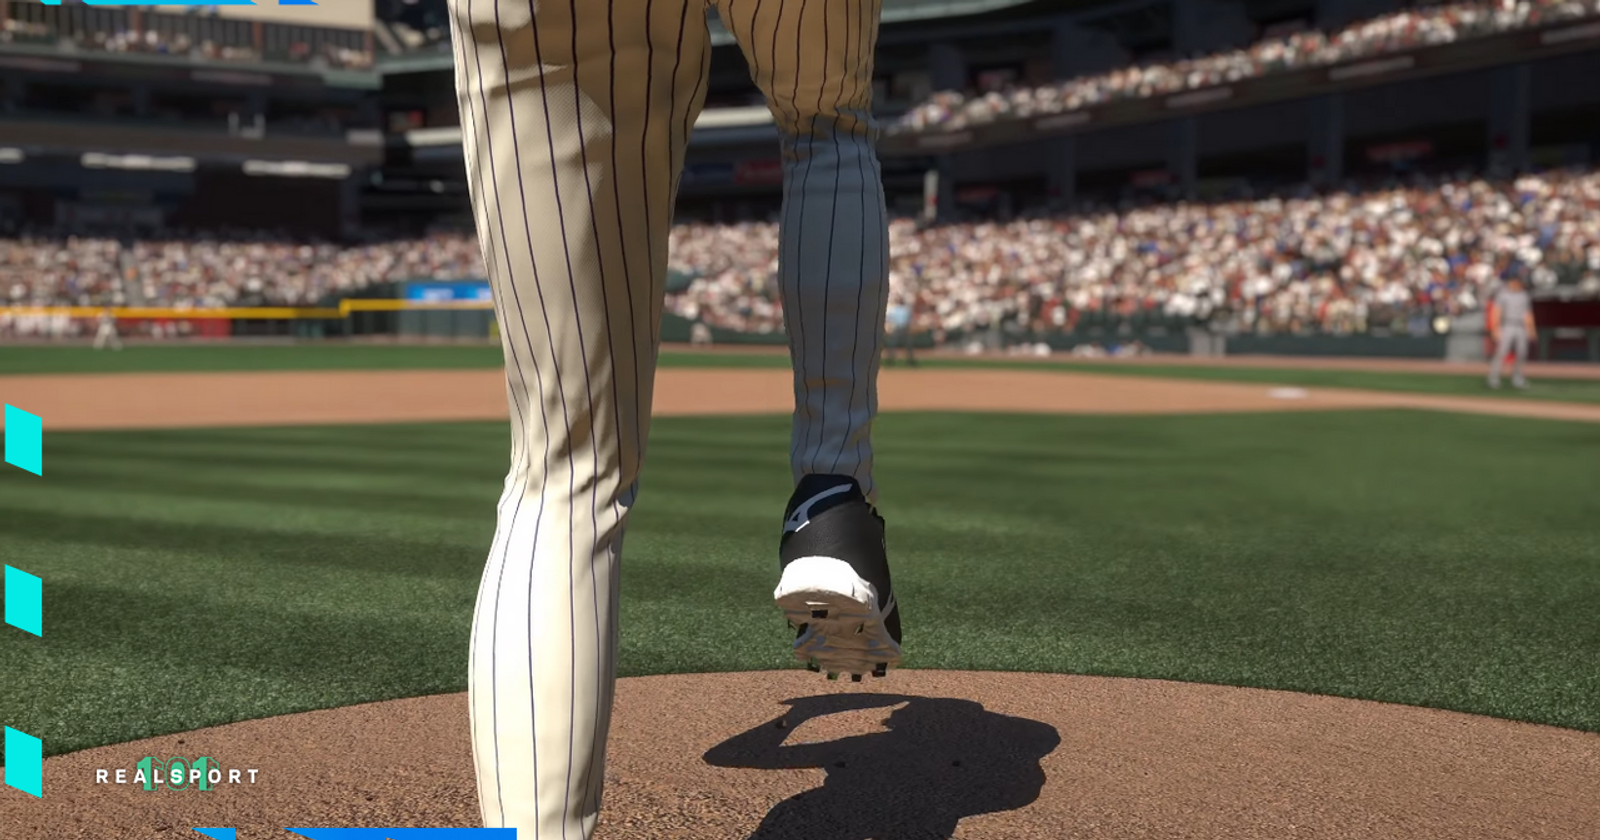 MLB The Show 22 FIRST LOOK! (Gameplay trailer for MLB The Show 22